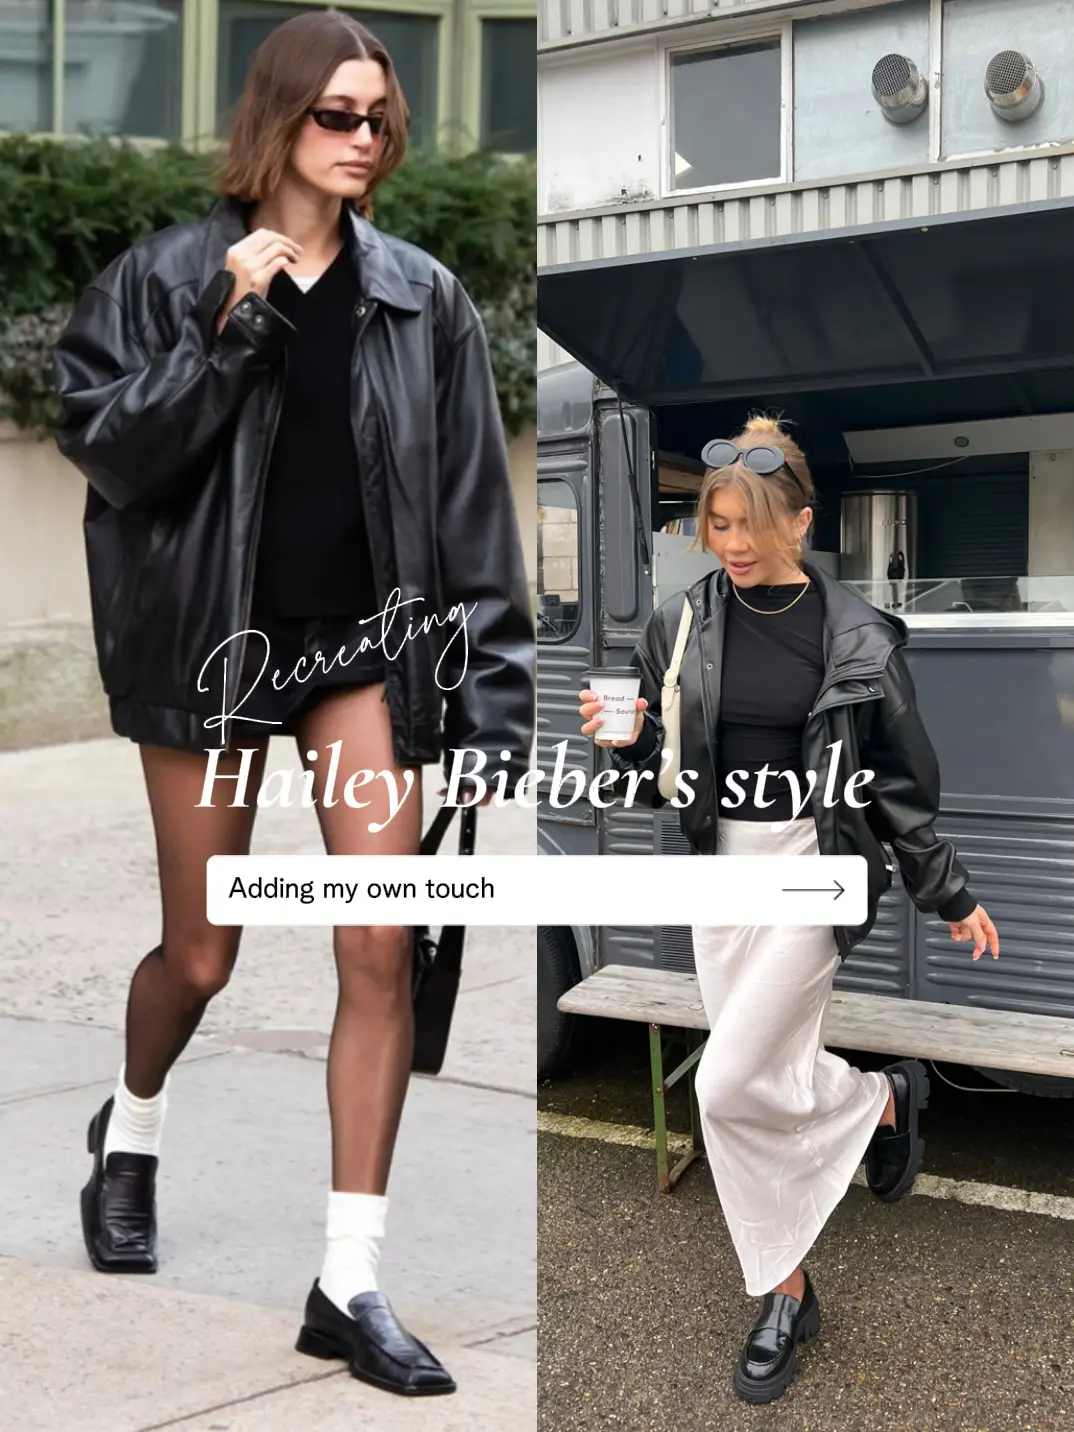 HOW TO GET HAILEY BIEBER'S ICONIC STREET STYLE LOOKS FOR LESS